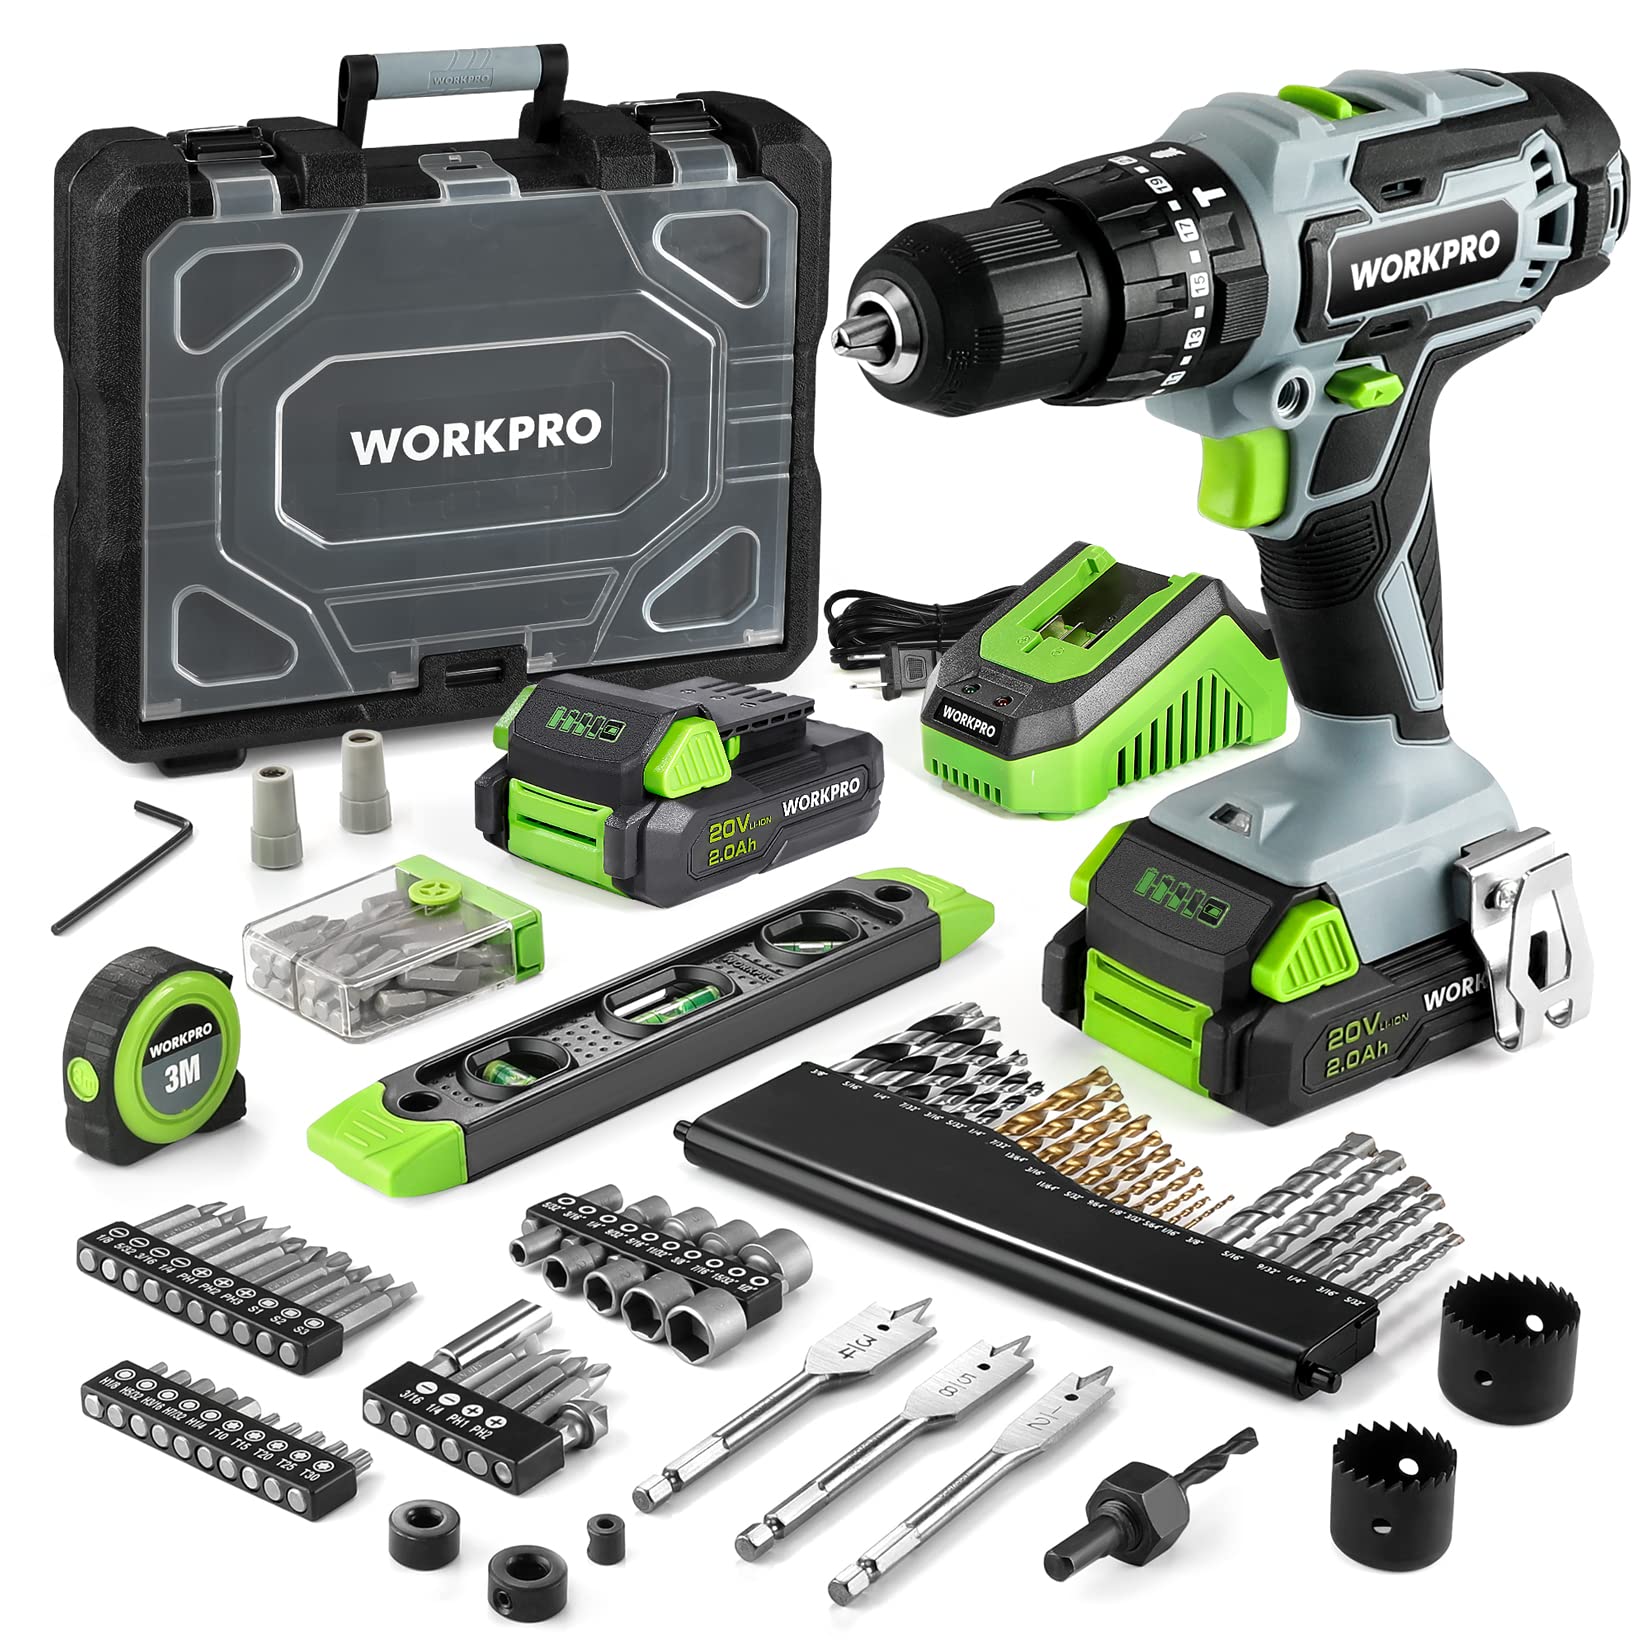 WORKPRO 20V Max Cordless Drill Driver Set Electric Power Impact Drill Tool with 102 Pieces Accessories 12 Chuck Impact D